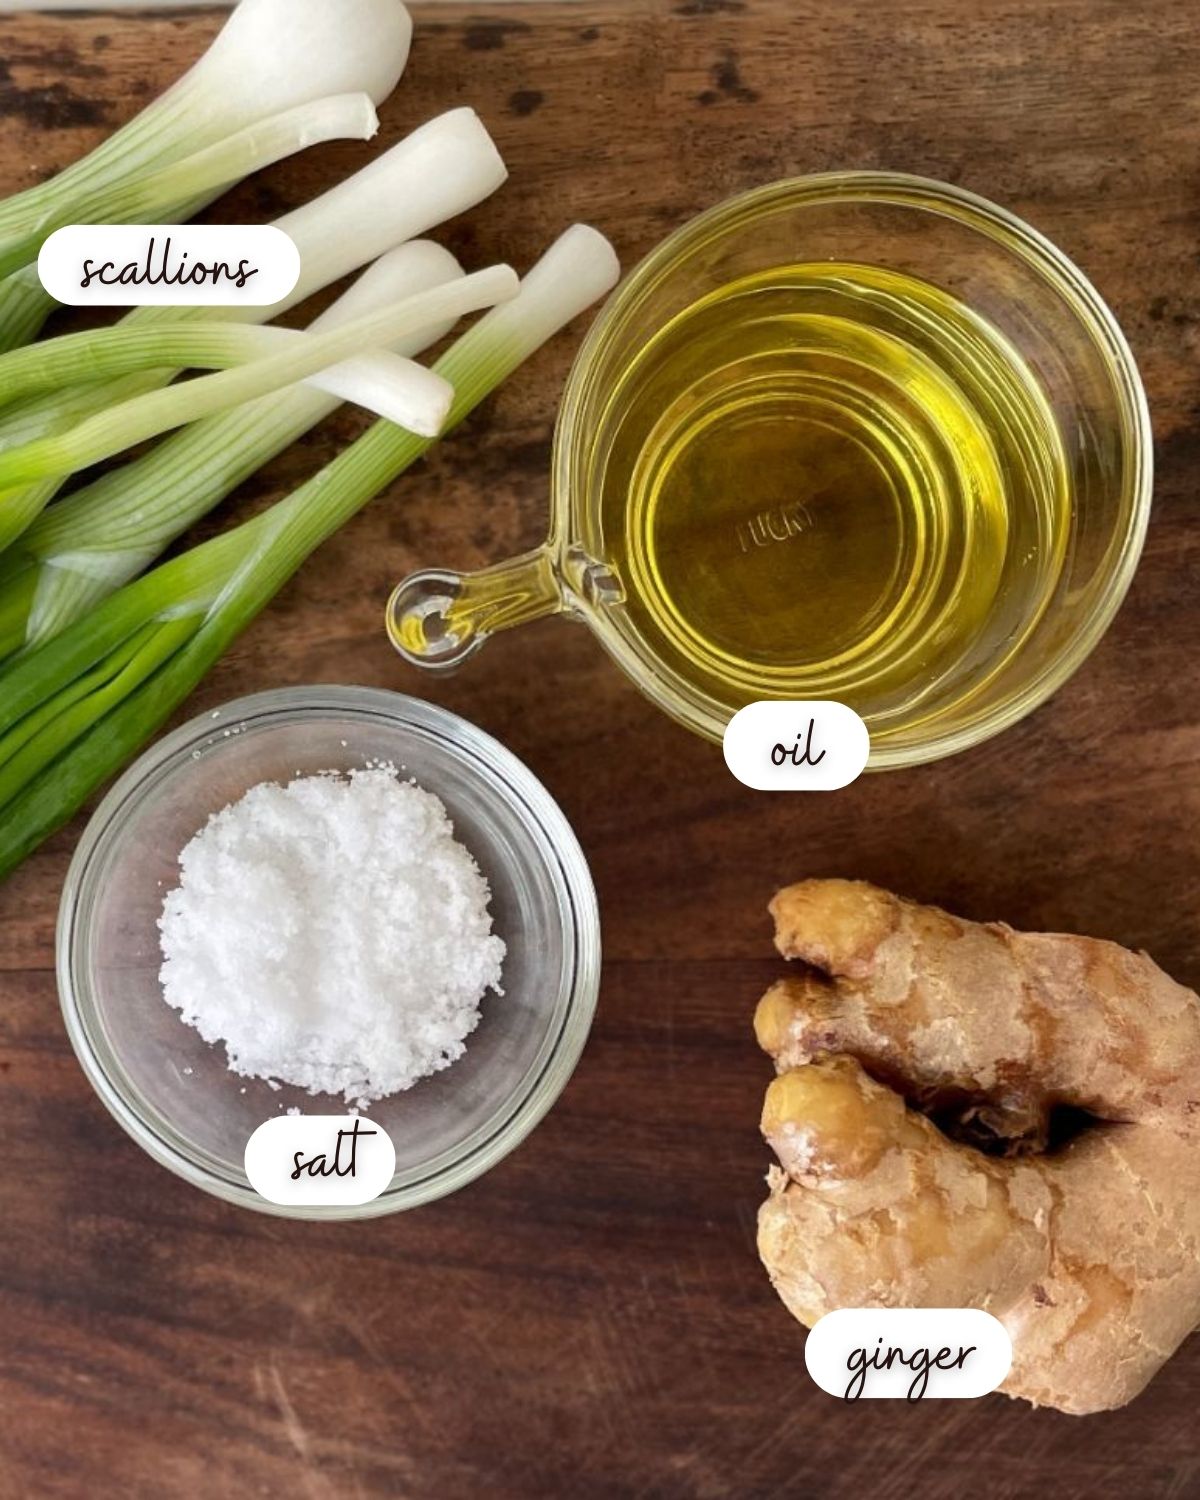 Ingredients of Scallion Ginger Oil